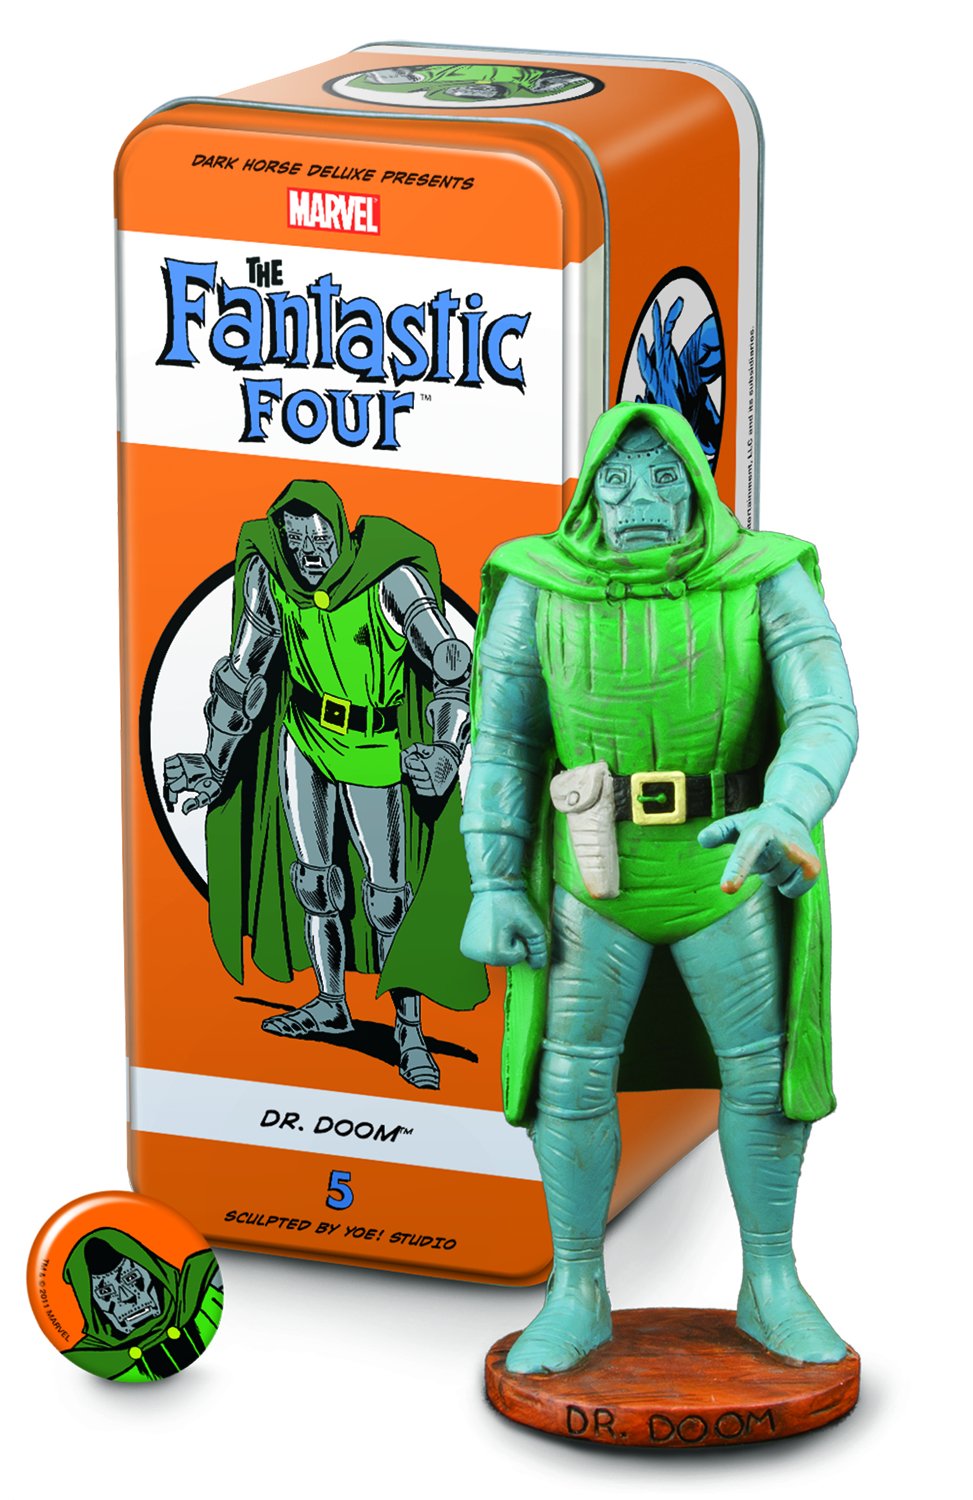 Dark Horse Deluxe Classic Marvel Characters- Fantastic Four #5 Dr. Doom